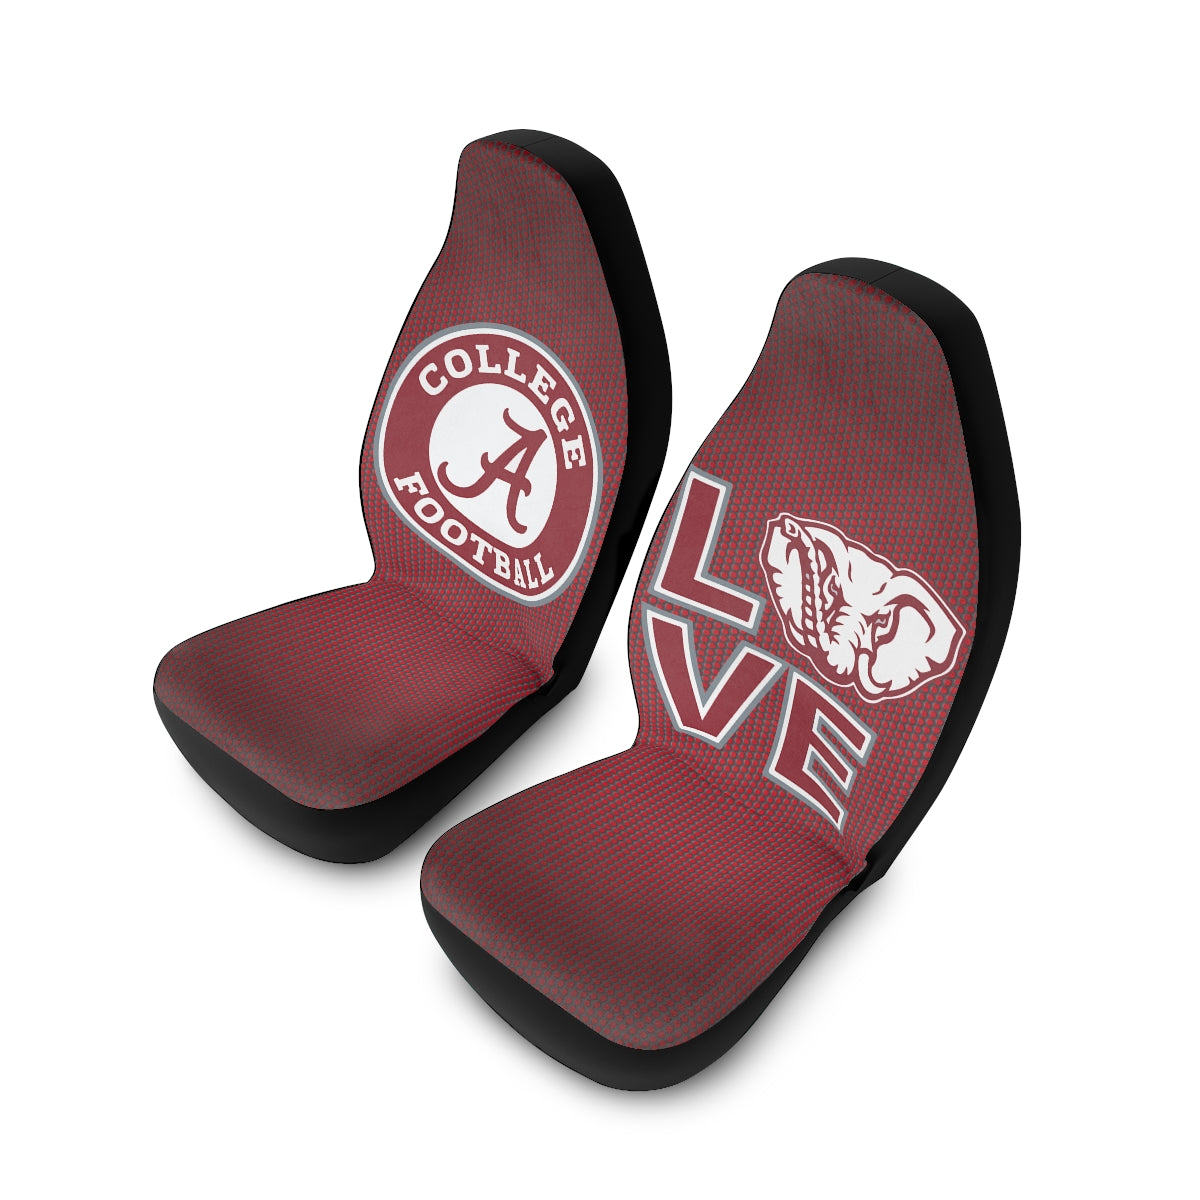 Alabama (2) Polyester Car Seat Covers